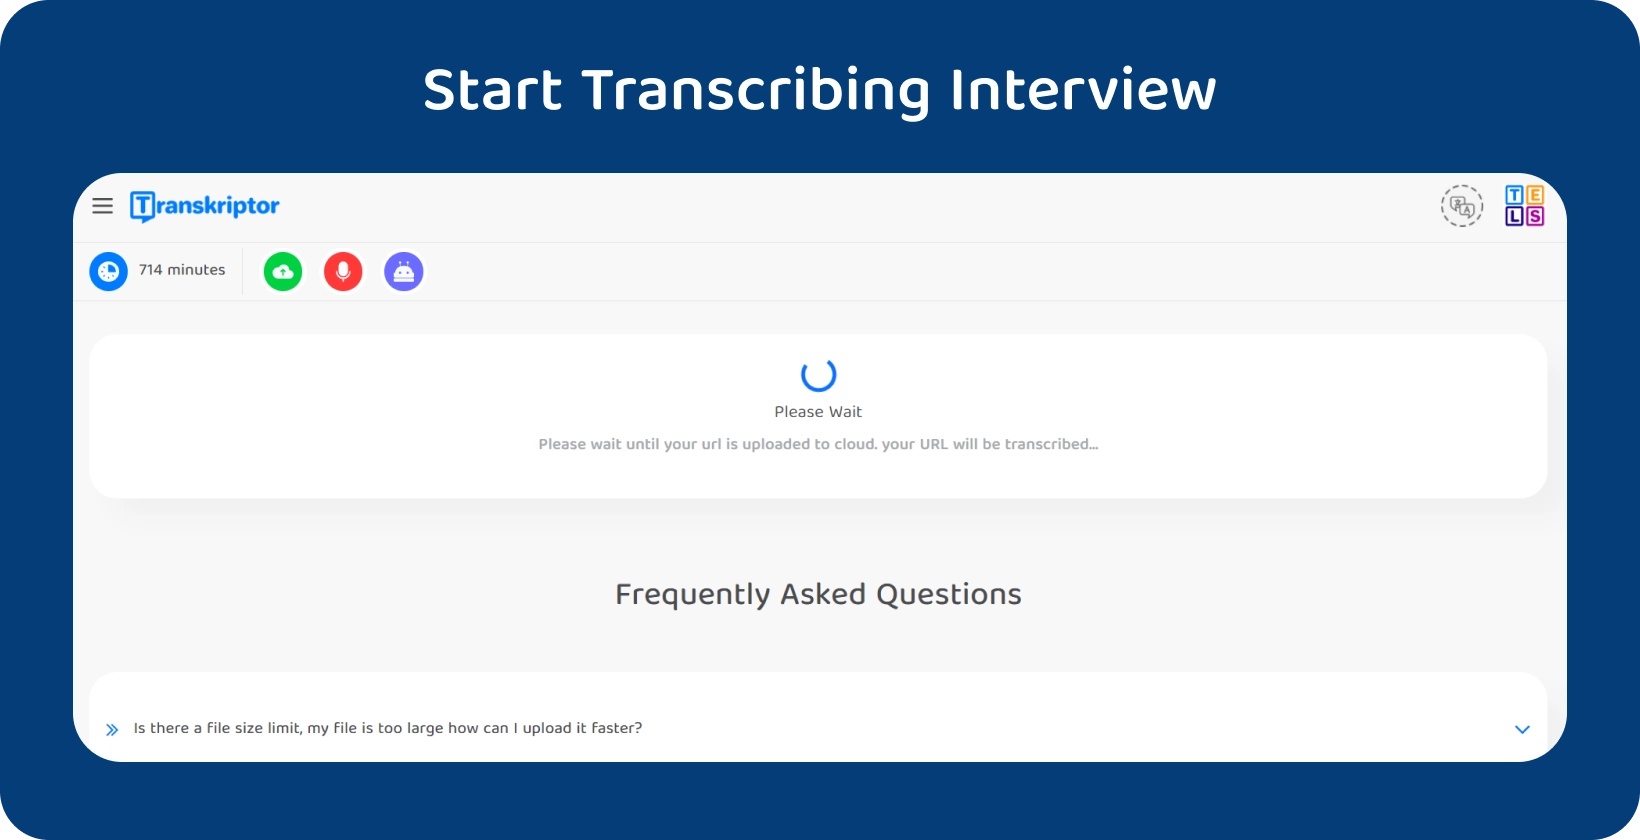 Start dissertation transcription with Transkriptor, showing a 714-minute interview waiting for processing.